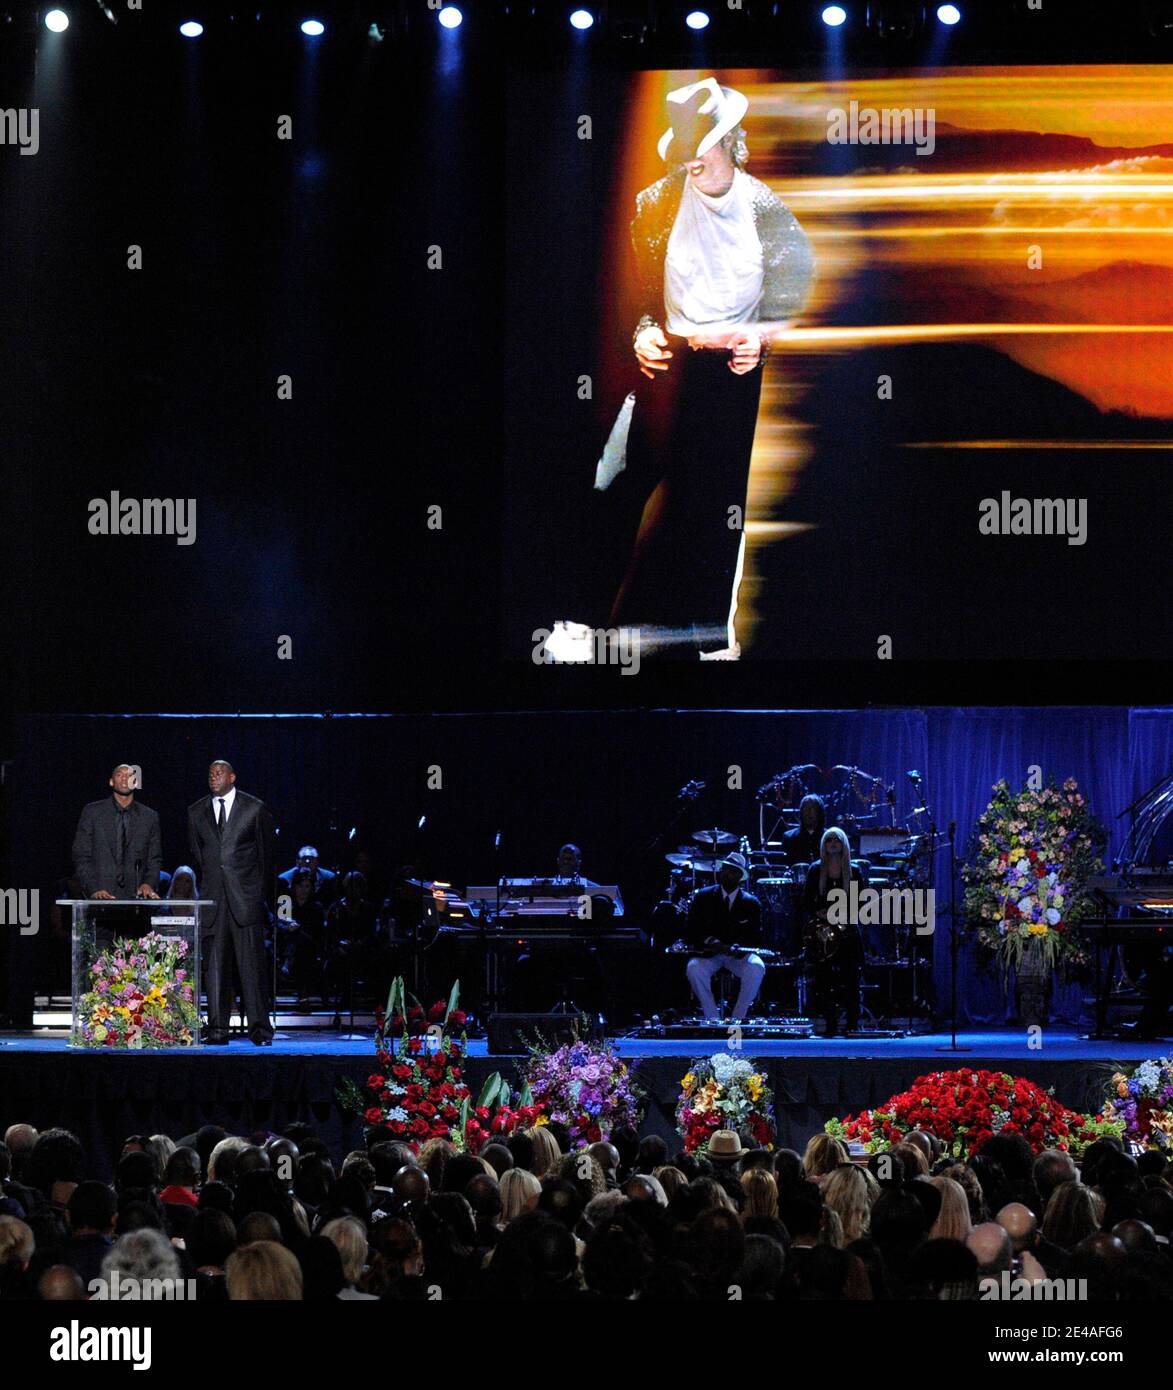 Kobe Bryant and Magic Johnson speak during the memorial service for Michael Jackson at the Staples Center in Los Angeles, CA, USA on July 7, 2009. Pool photo by Mark J. Terrill/AP/PA-ABACAPRESS.COM (Pictured: Kobe Bryant, Magic Johnson) Stock Photo